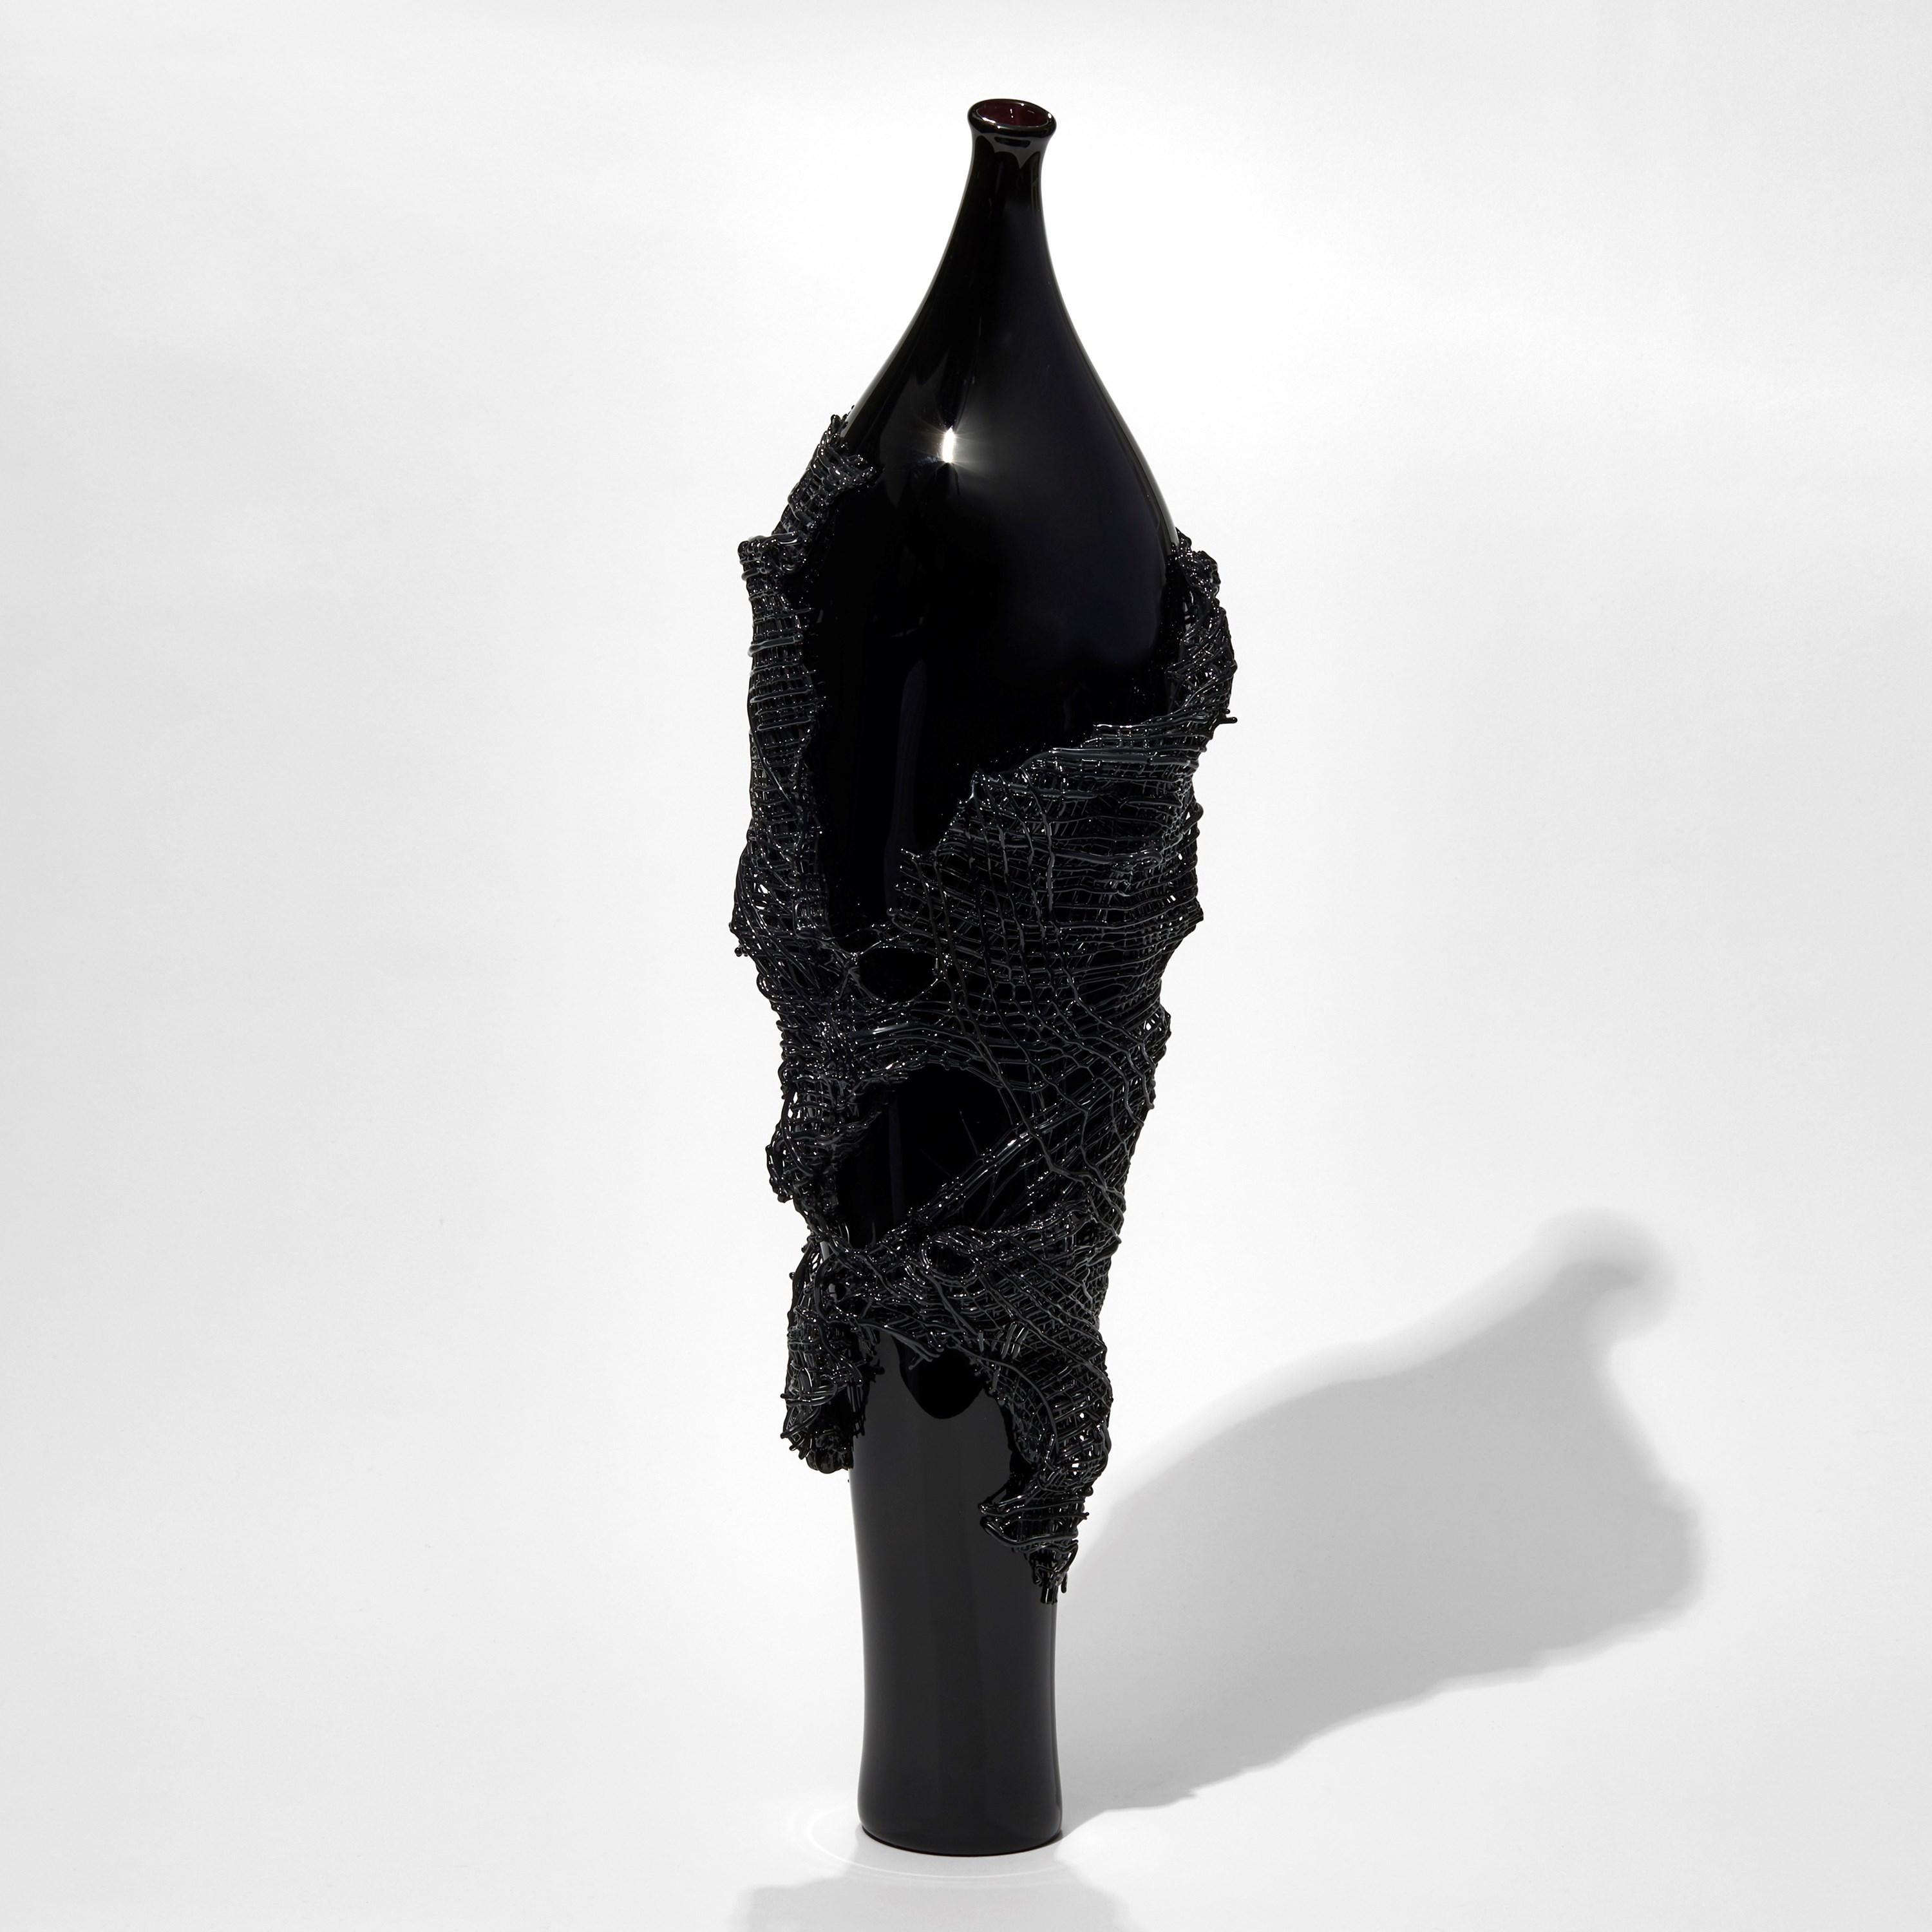 Odysseus, is a unique black glass sculpture by the British artist Cathryn Shilling. A handblown and free-form shaped glass sculpture with 'glass fabric' decoration worked onto the glass body while hot. A spectacular fusion of blown and kiln formed